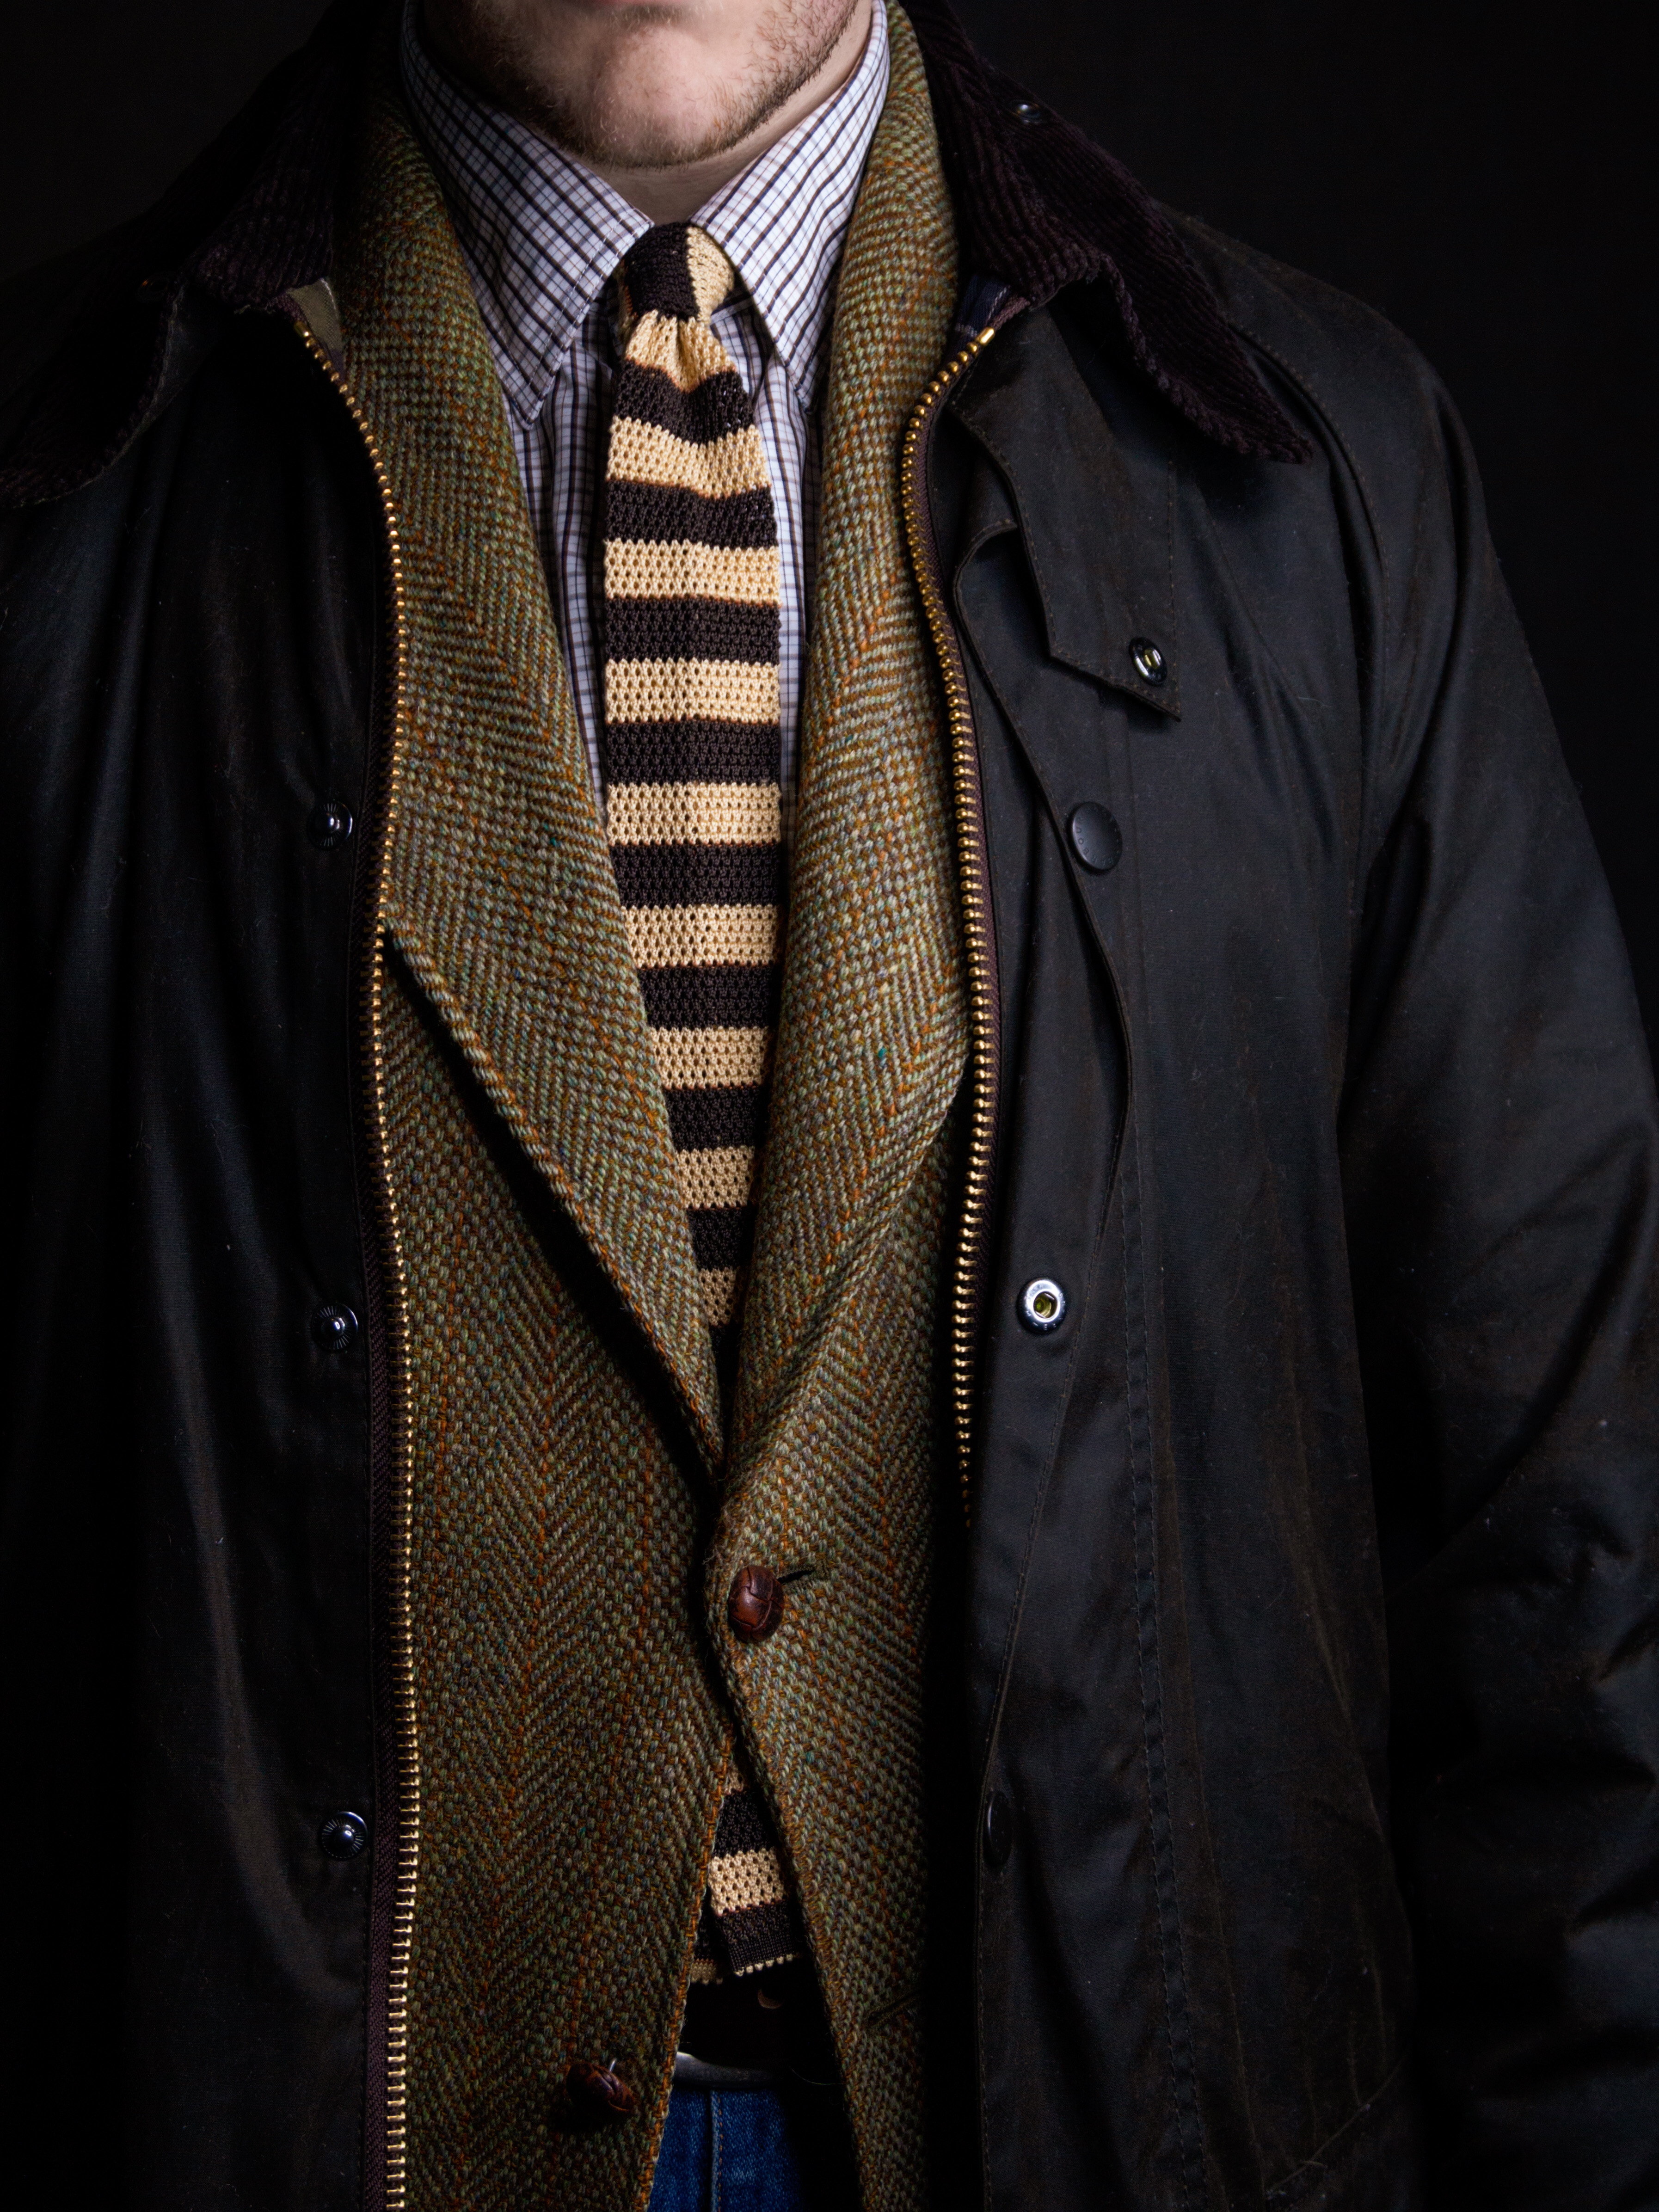 Barbour Classic Beaufort Waxed Jacket Review – SamTalksStyle